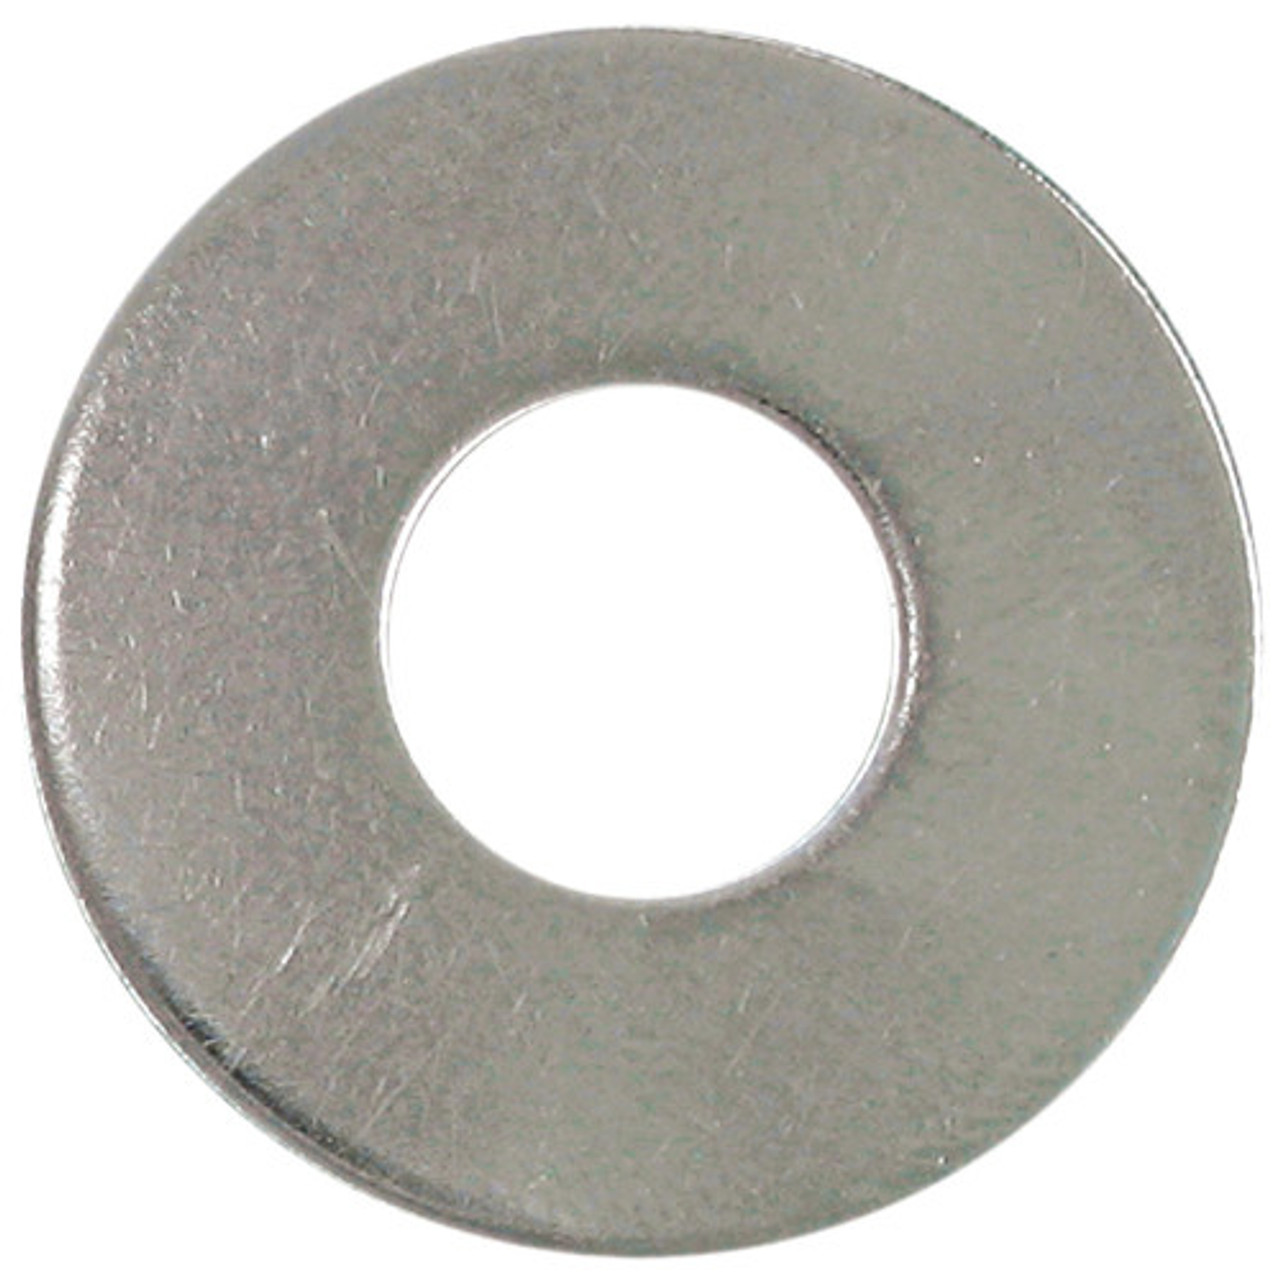 1-1/2' Zinc Plated Spacer Washer 50 Pc.   162-938